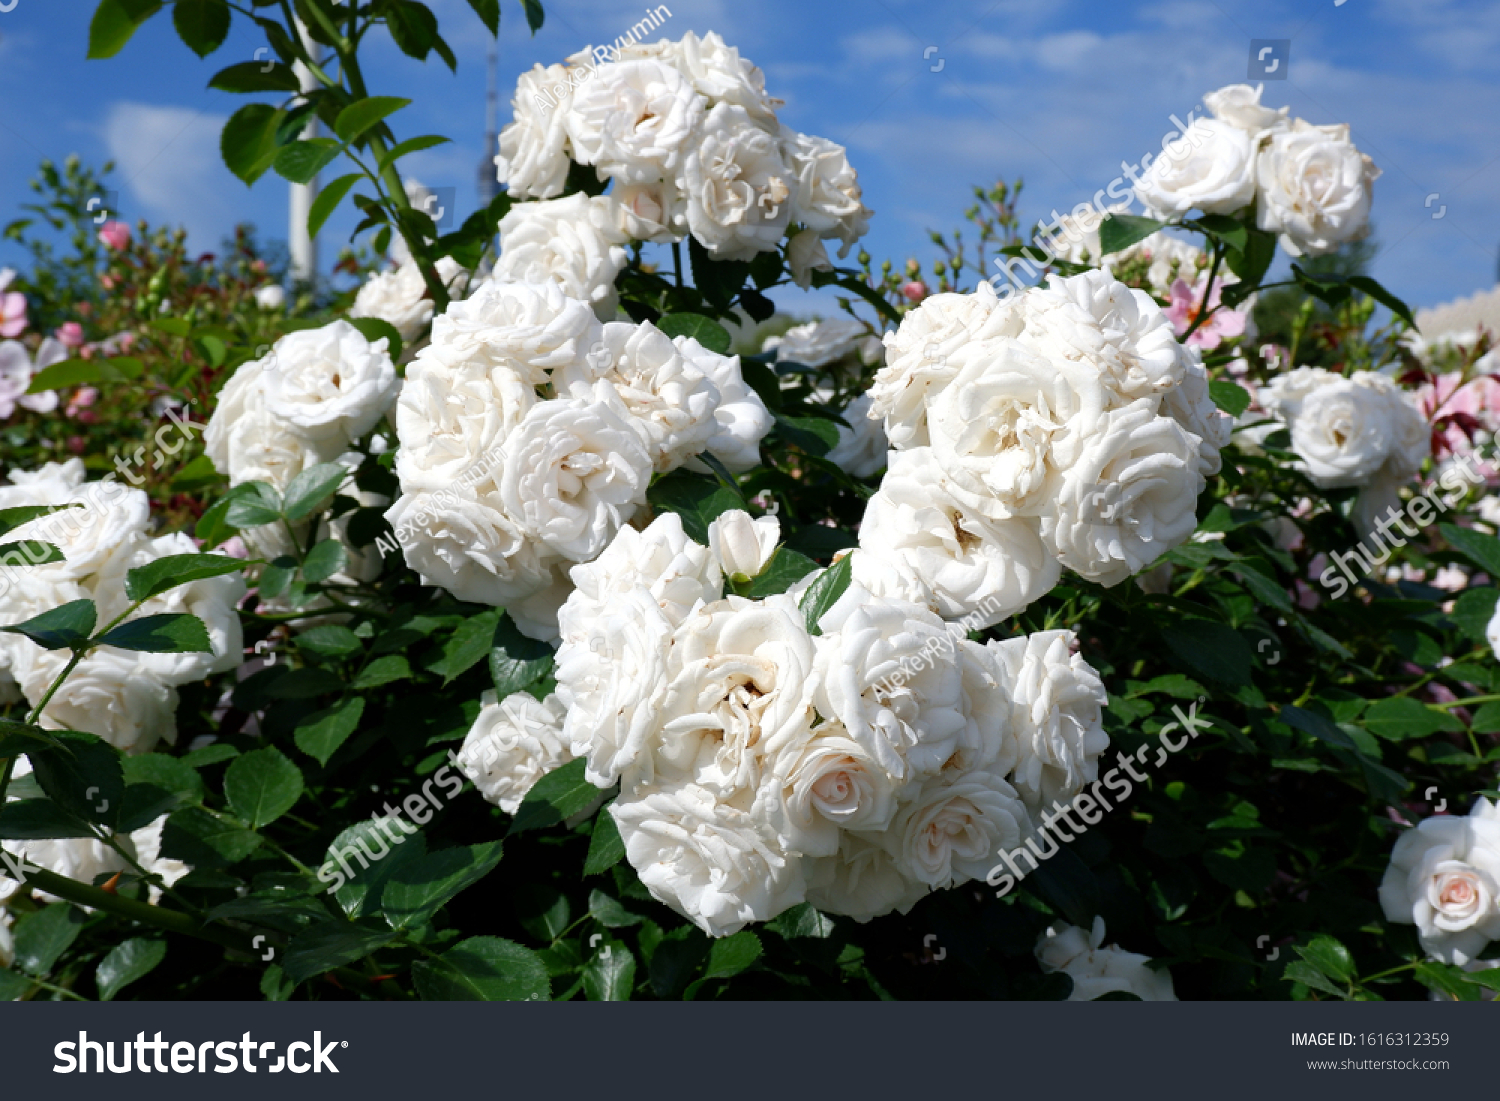 Bunch of white blooming roses on rose bush closeup view